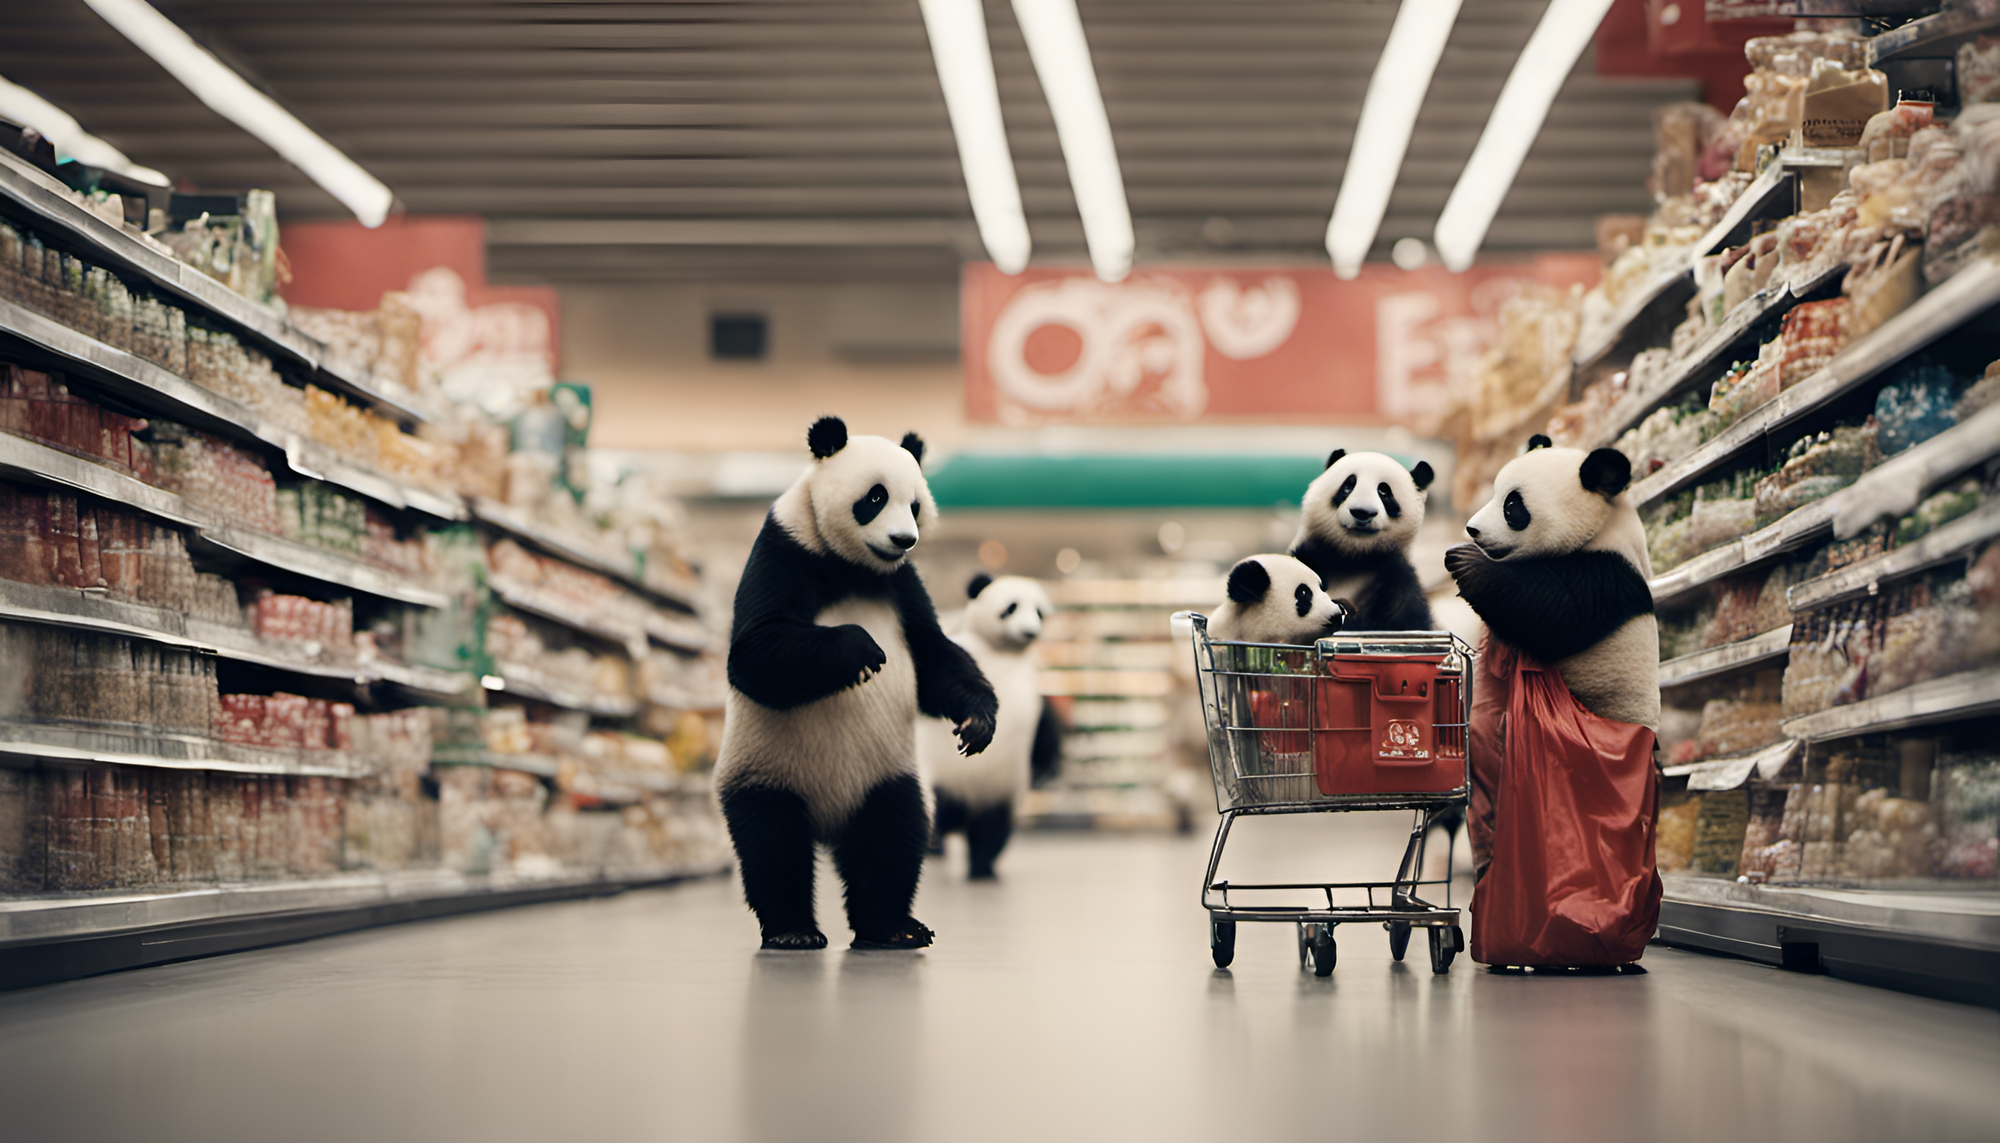 Image of a family of pandas shopping in a supermarket